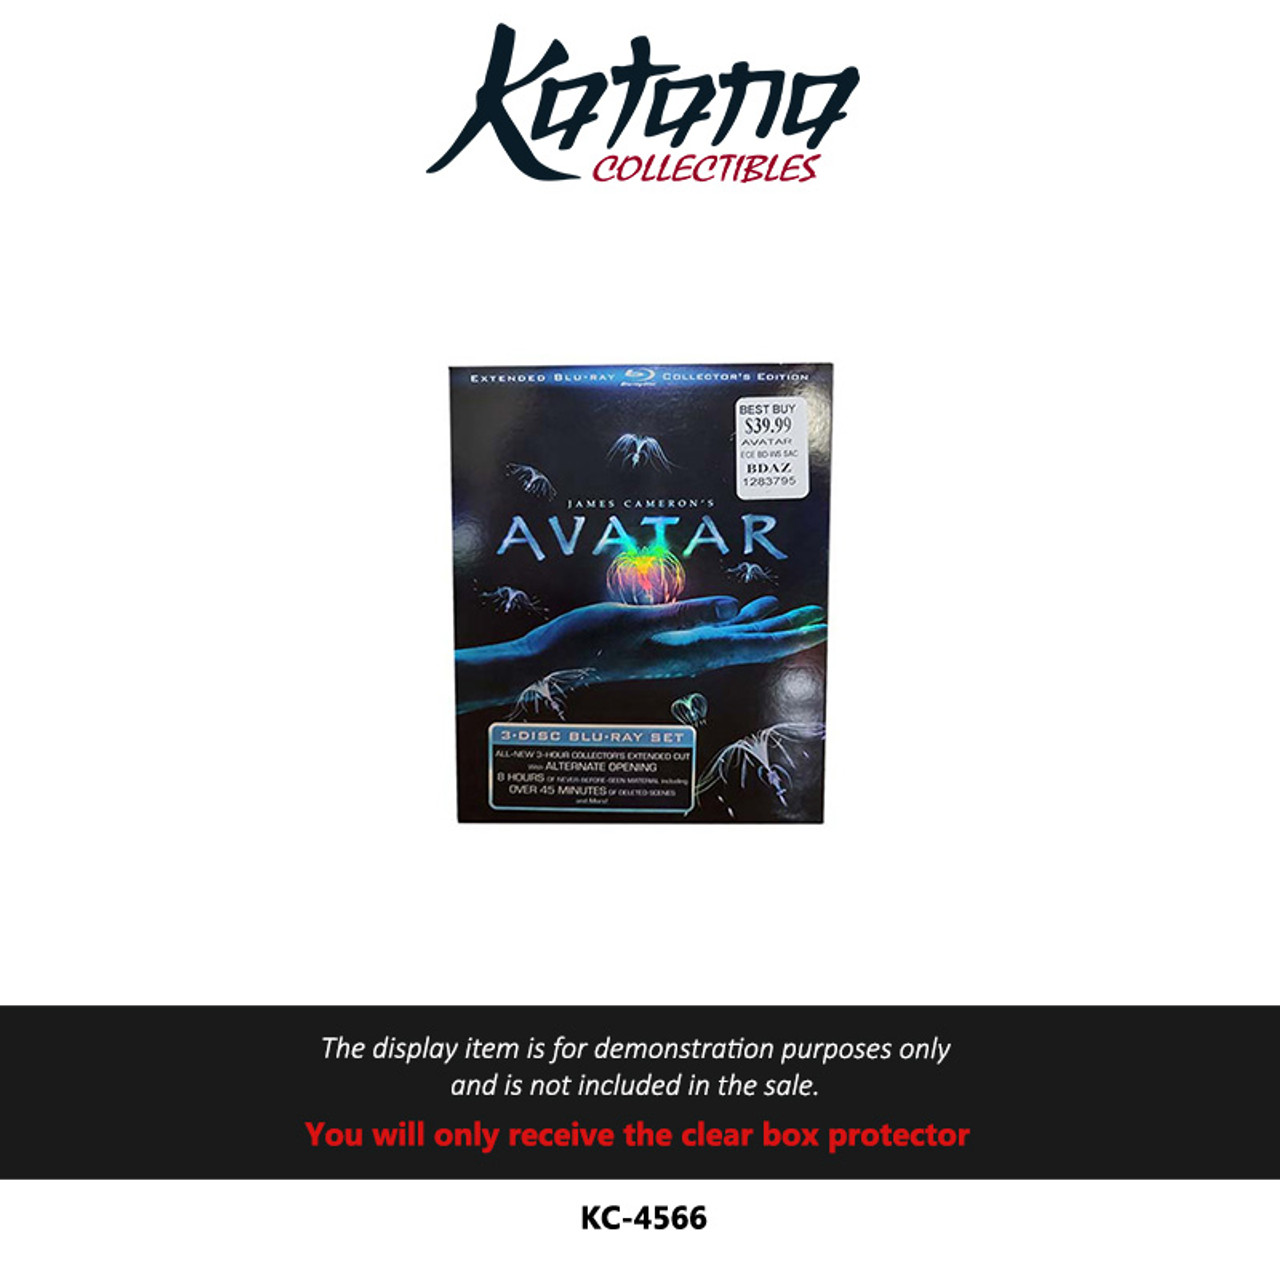 Katana Collectibles Protector For Avatar Extended Collector's Edition Box